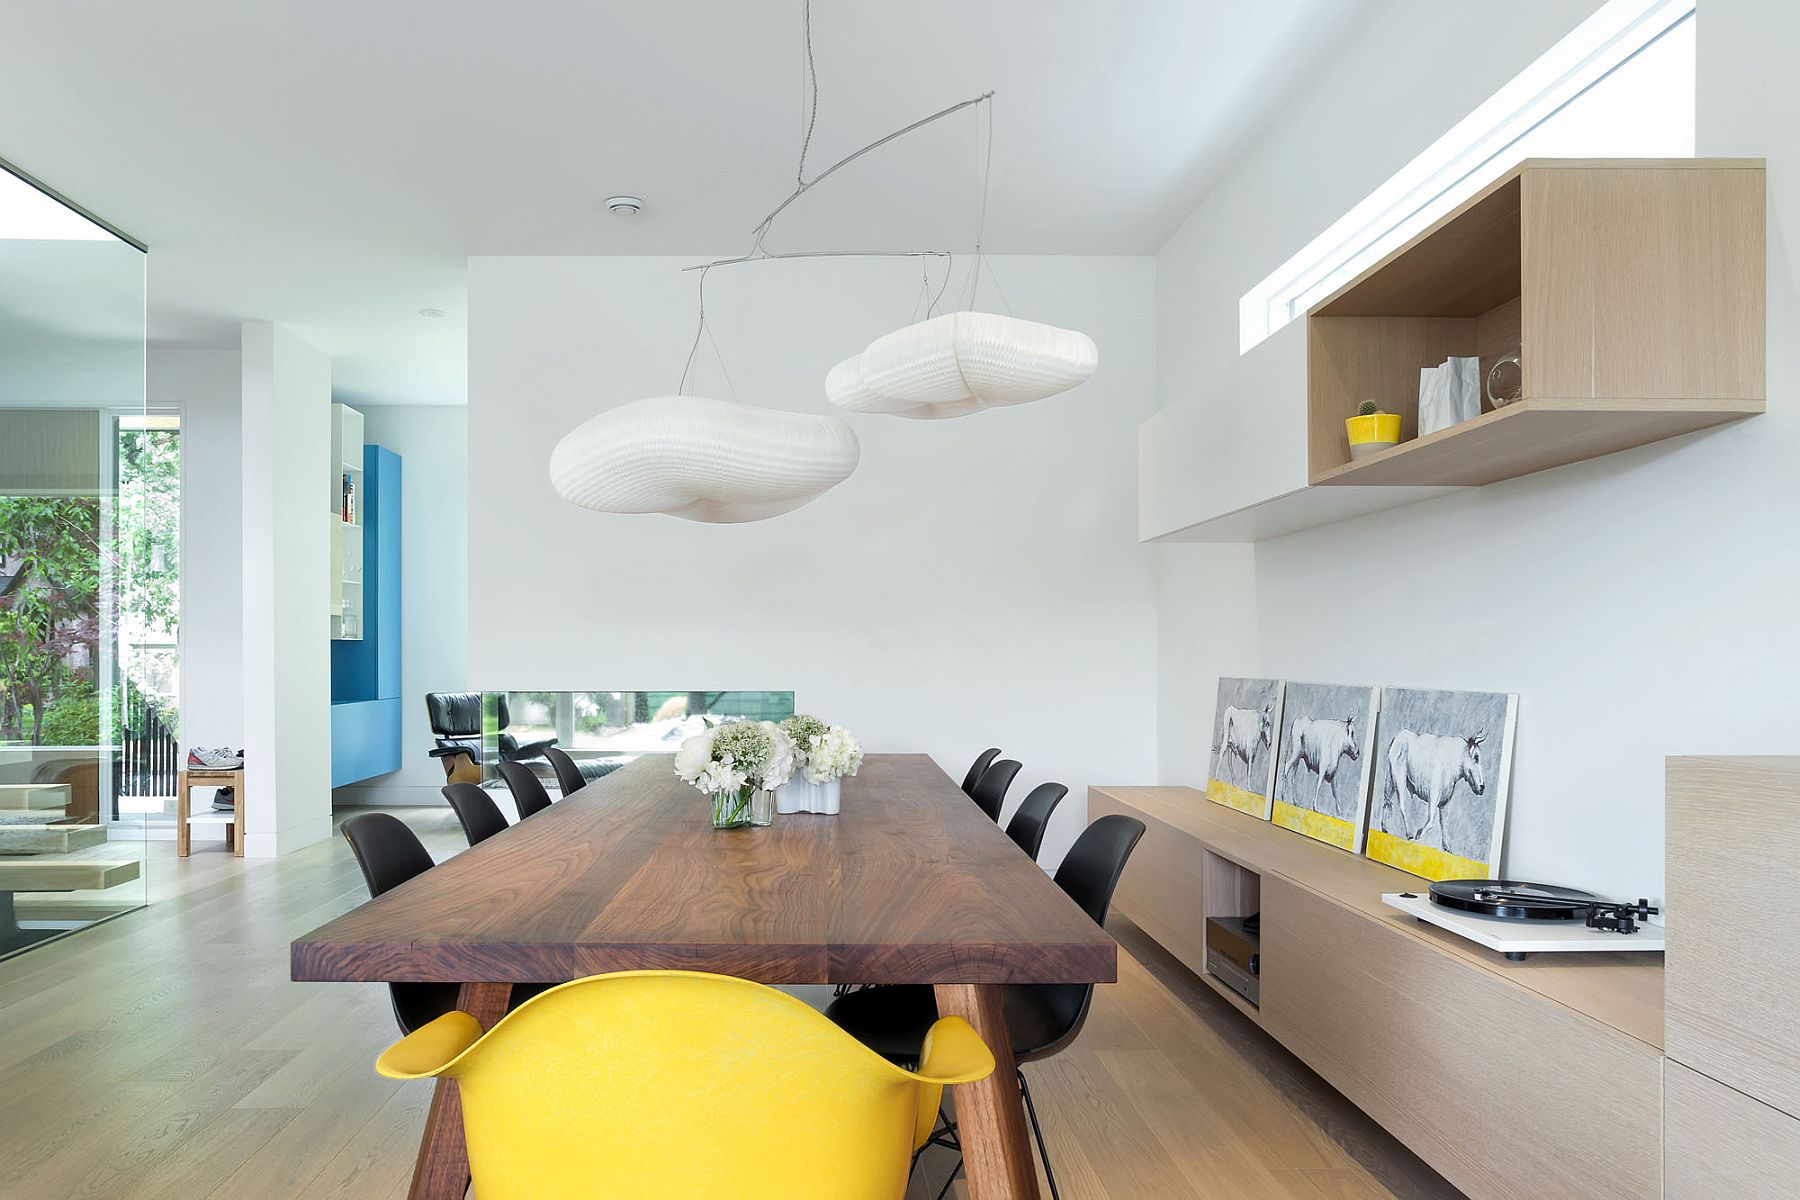 Pendant lights and the yellow chair give the dining space a whimsical appeal